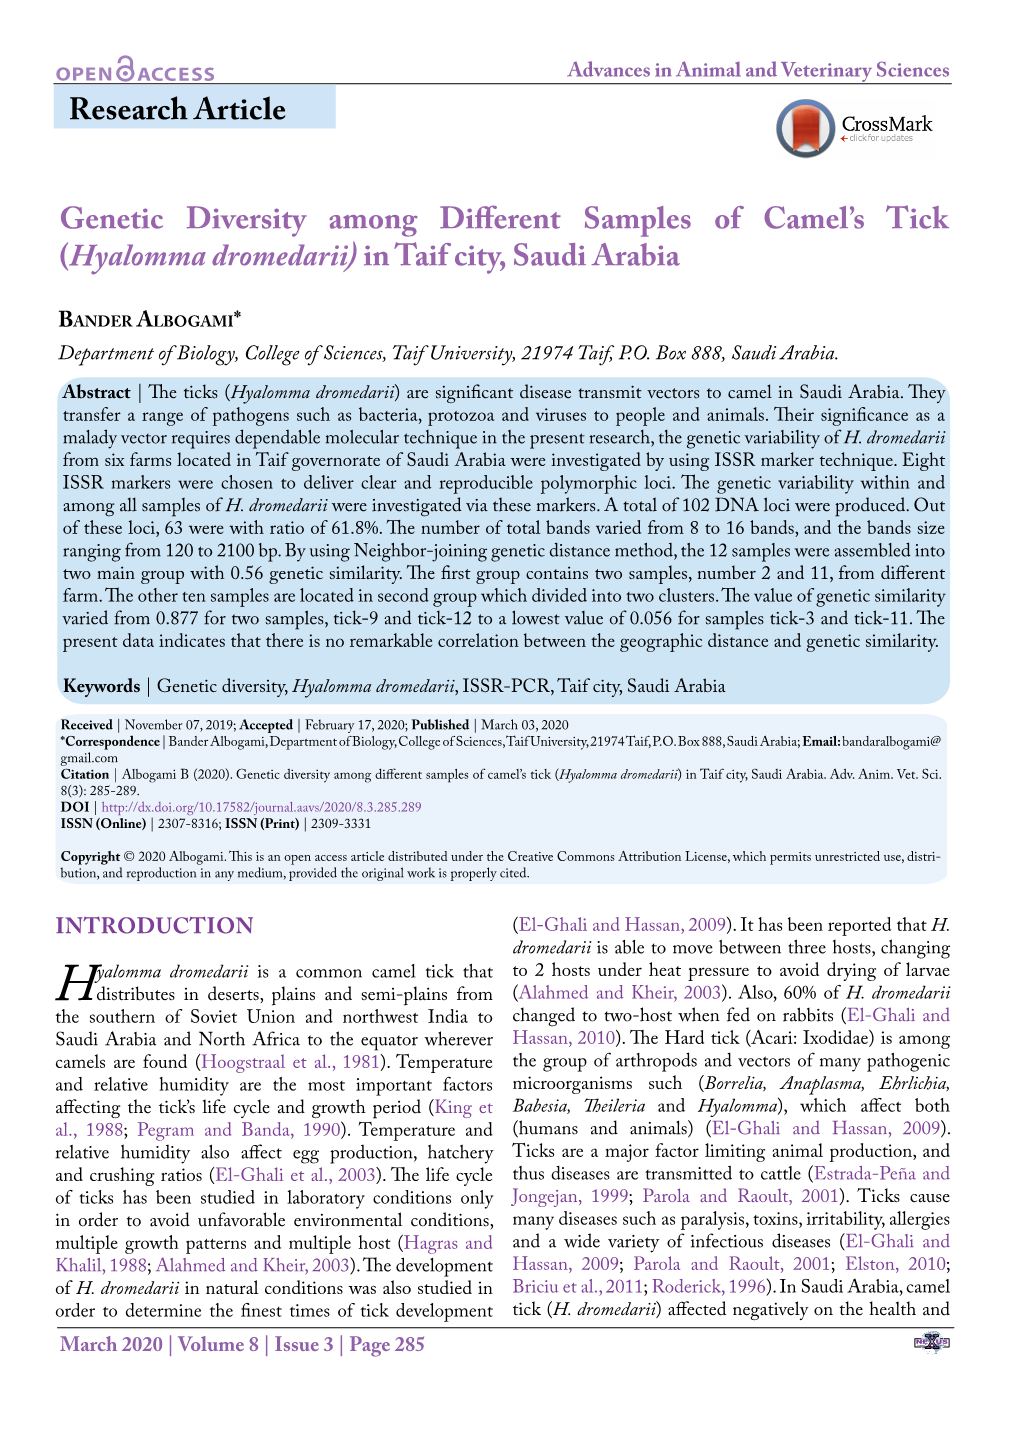 Research Article Genetic Diversity Among Different Samples of Camel's Tick (Hyalomma Dromedarii) in Taif City, Saudi Arabia